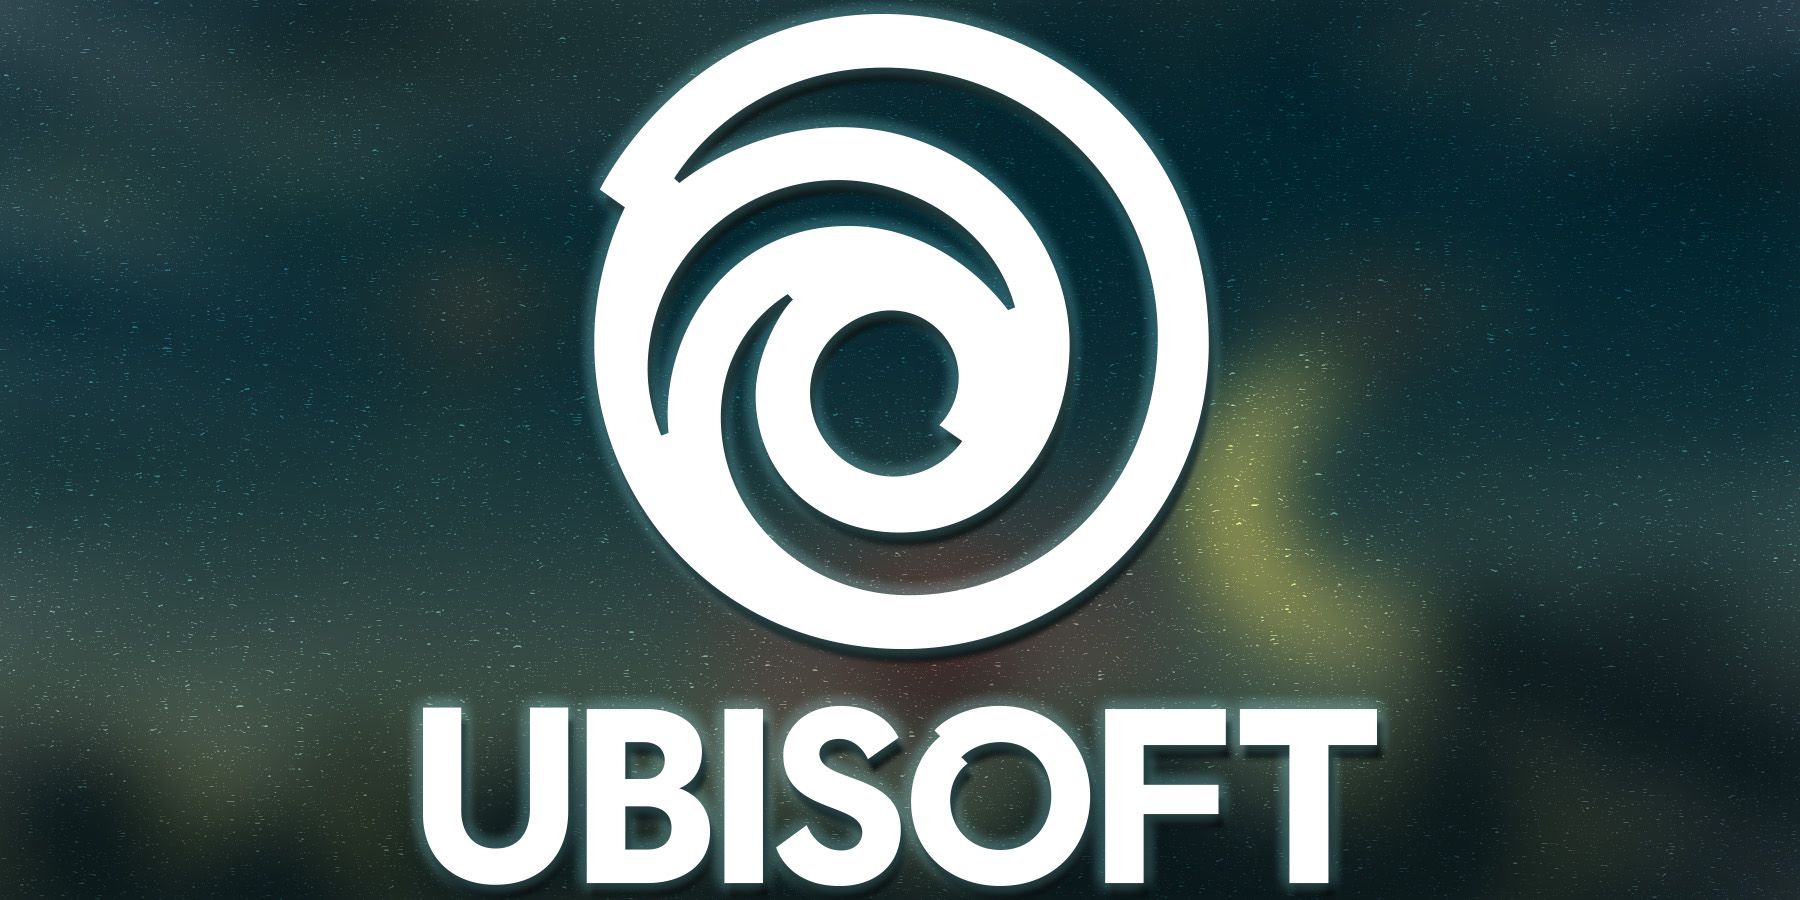 White Ubisoft logo with dark teal outer glow on blurred Valiant Hearts Coming Home screenshot